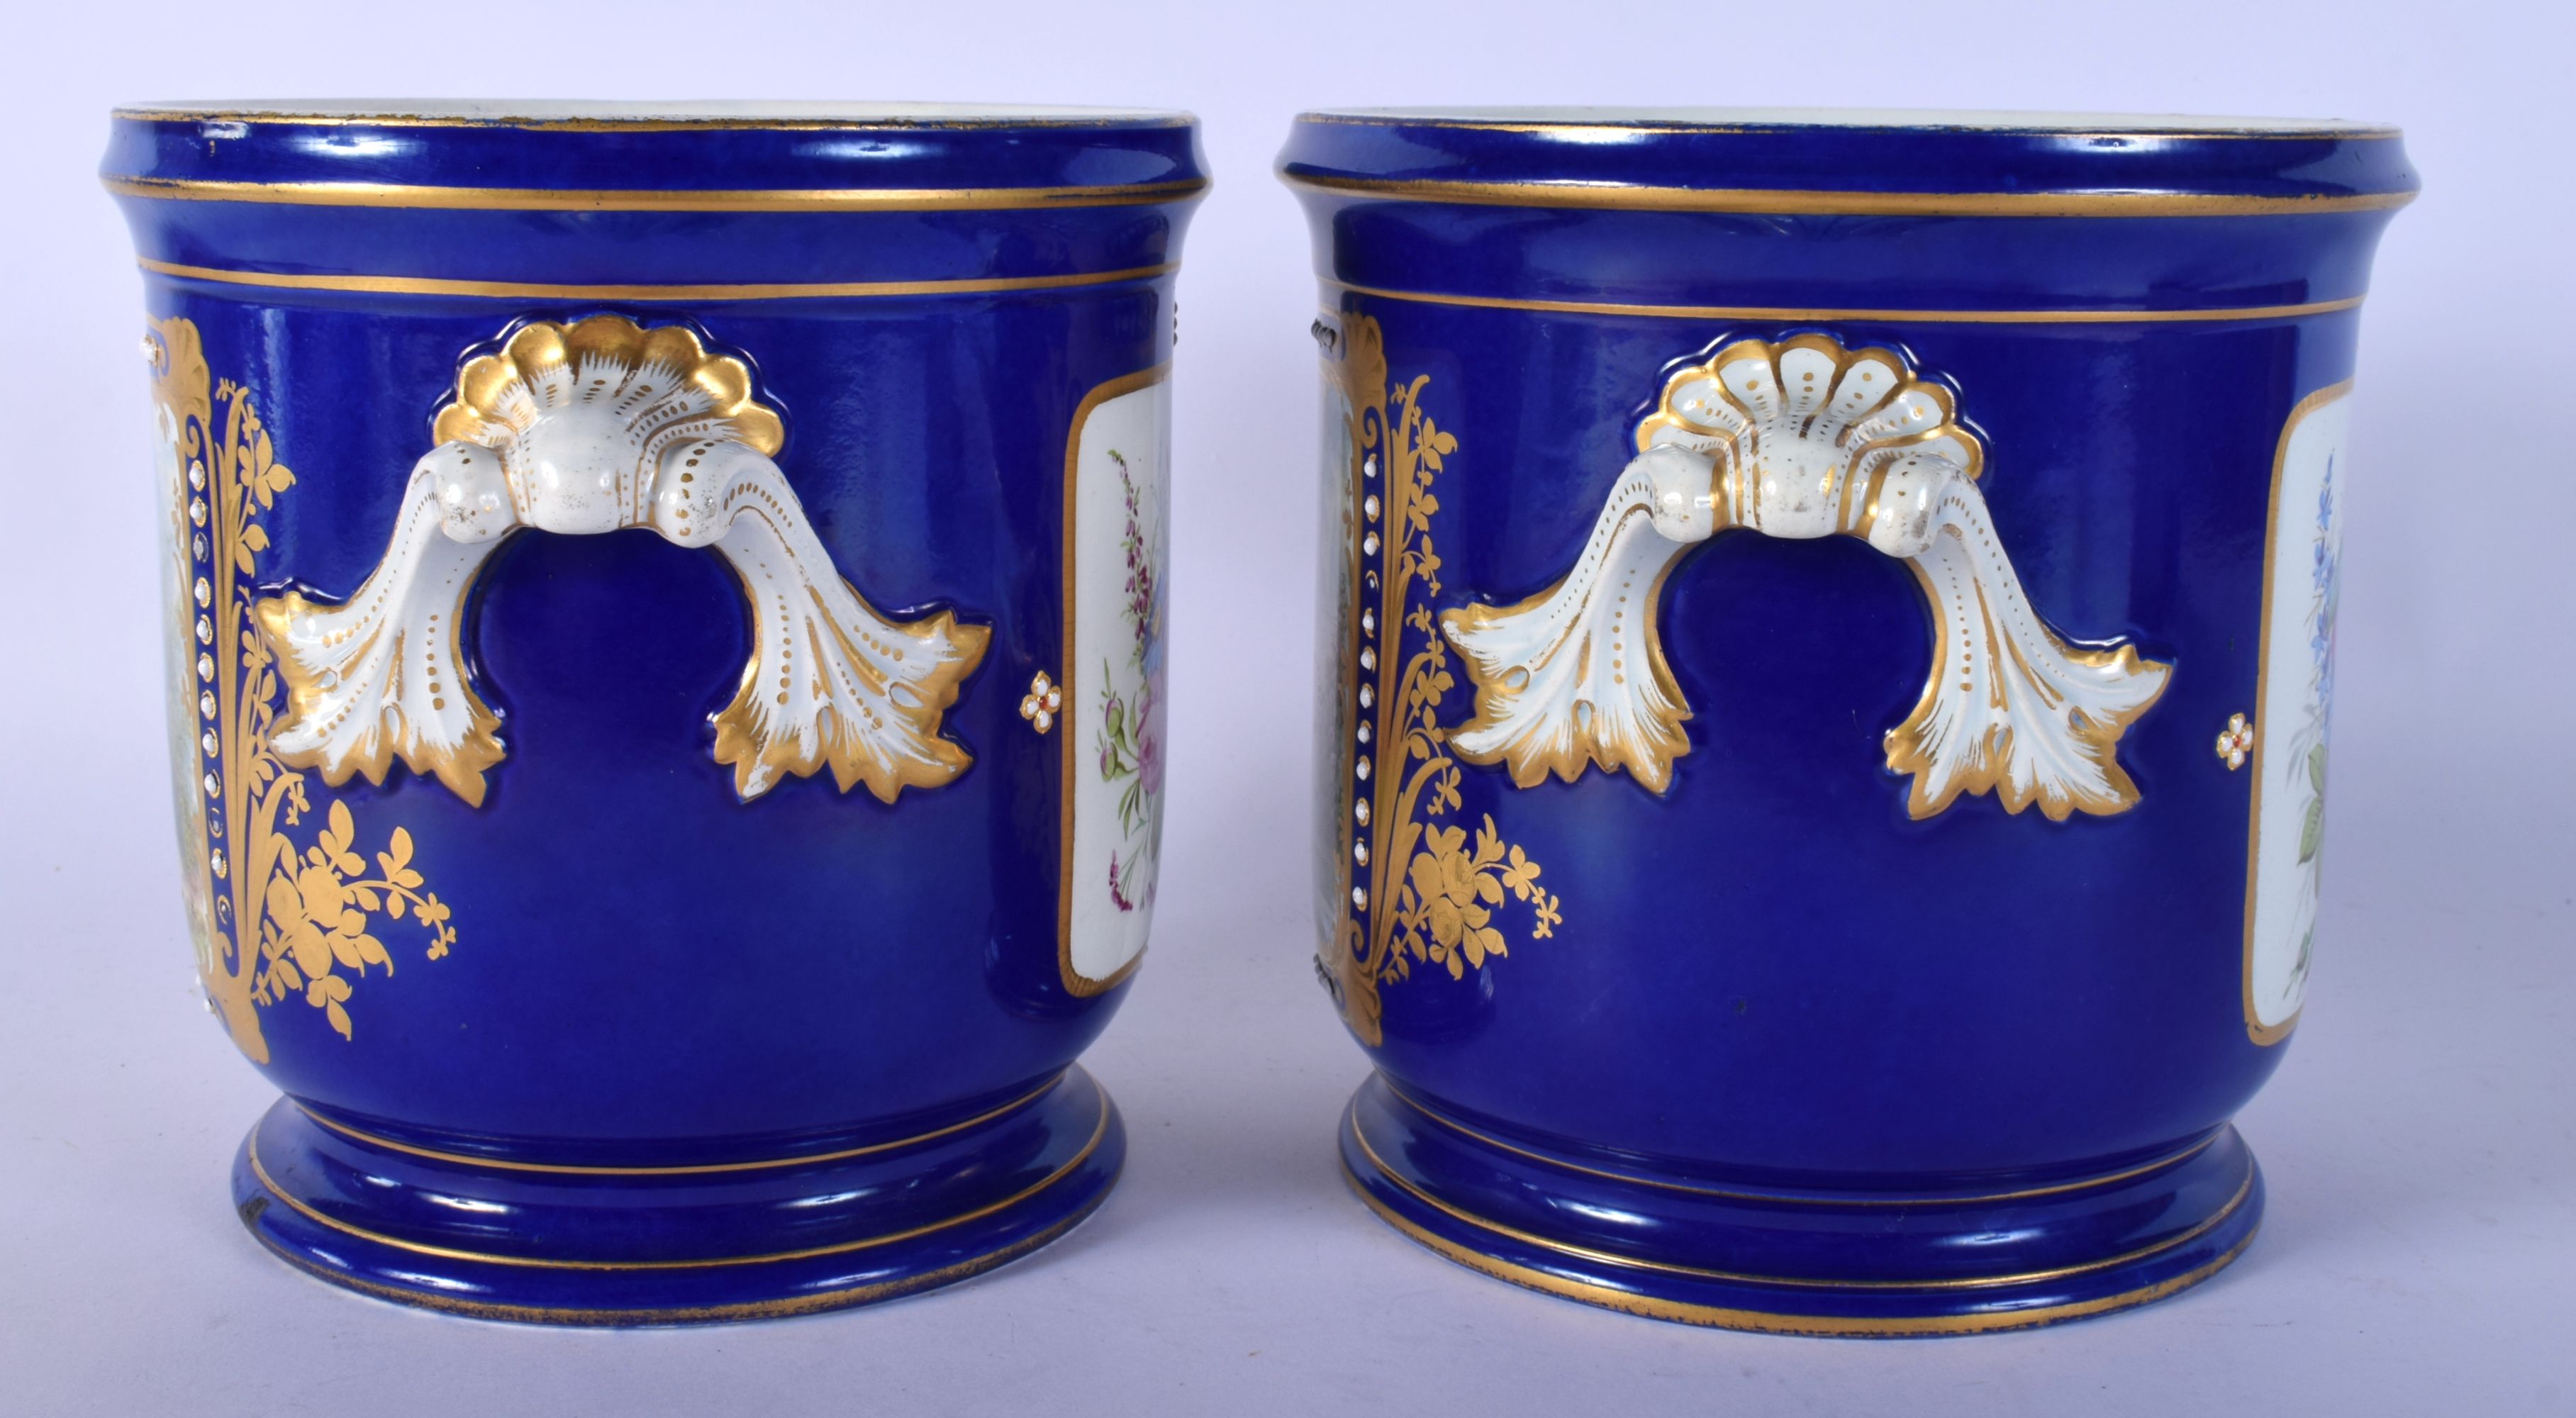 A PAIR OF 19TH CENTURY FRENCH SEVRES PORCELAIN TWIN HANDLE CACHE POT painted with lovers in landscap - Image 2 of 6